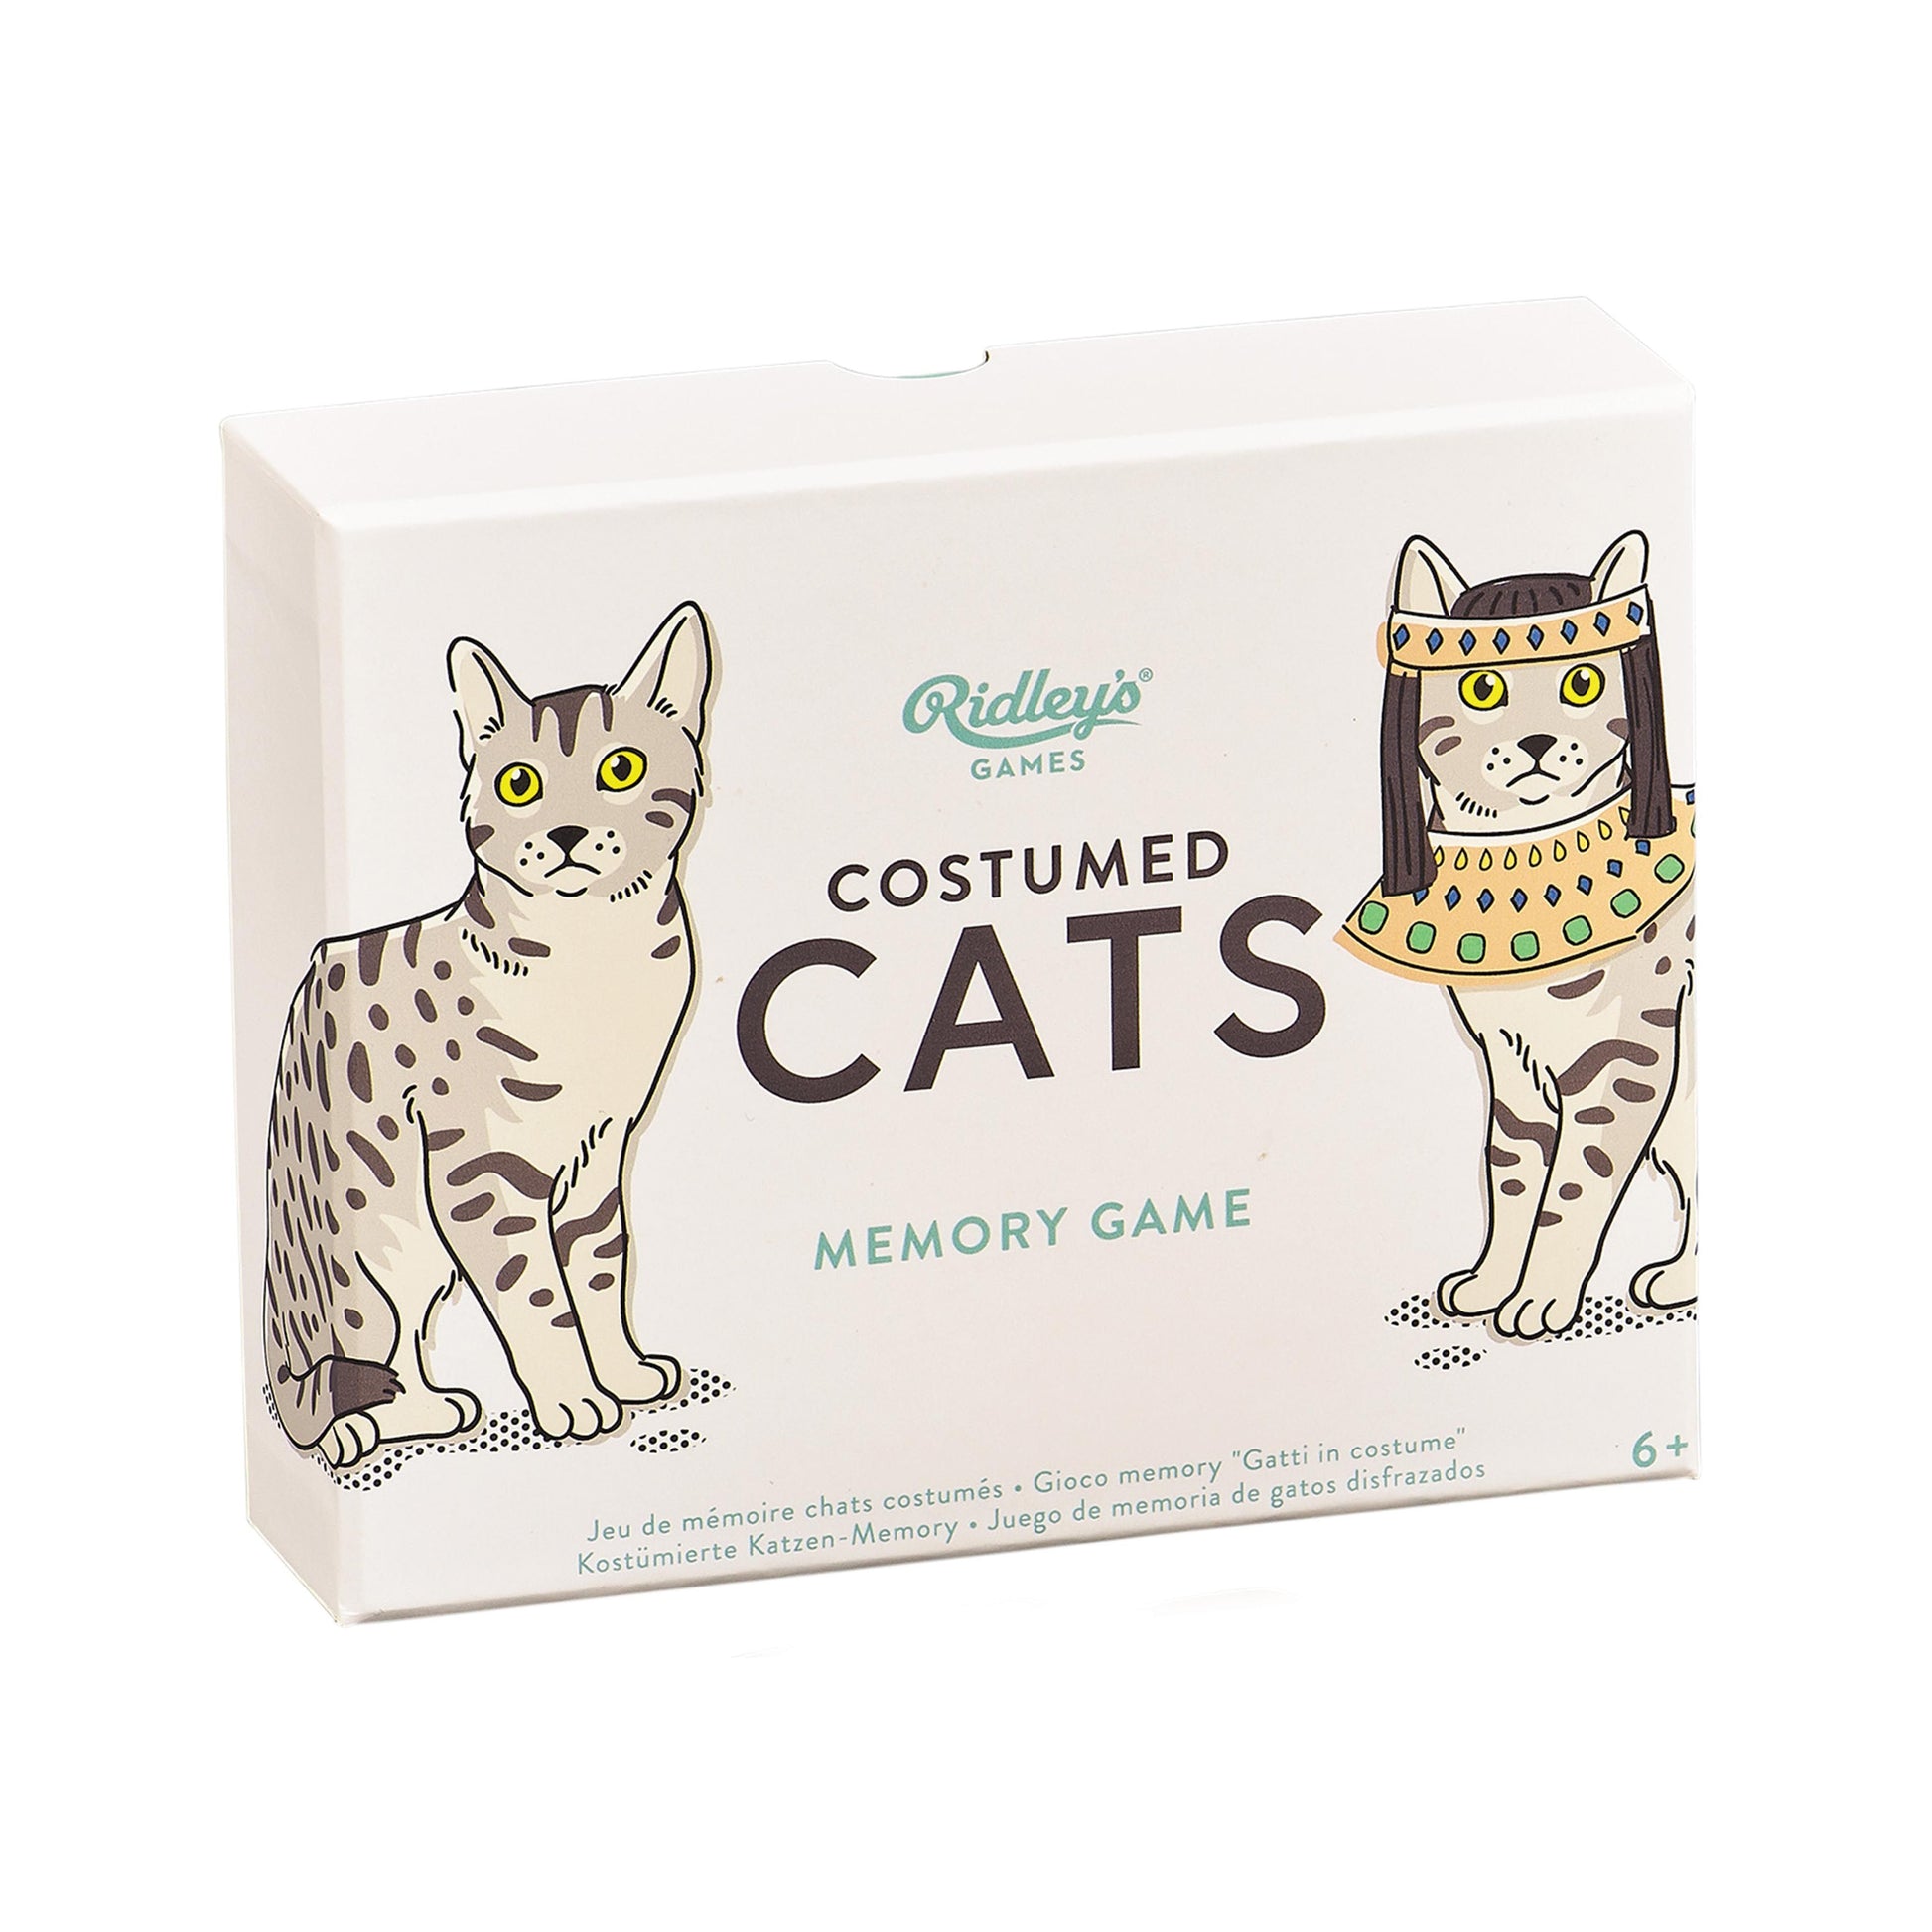 Costumed Cats Memory Game - Gifts R Us